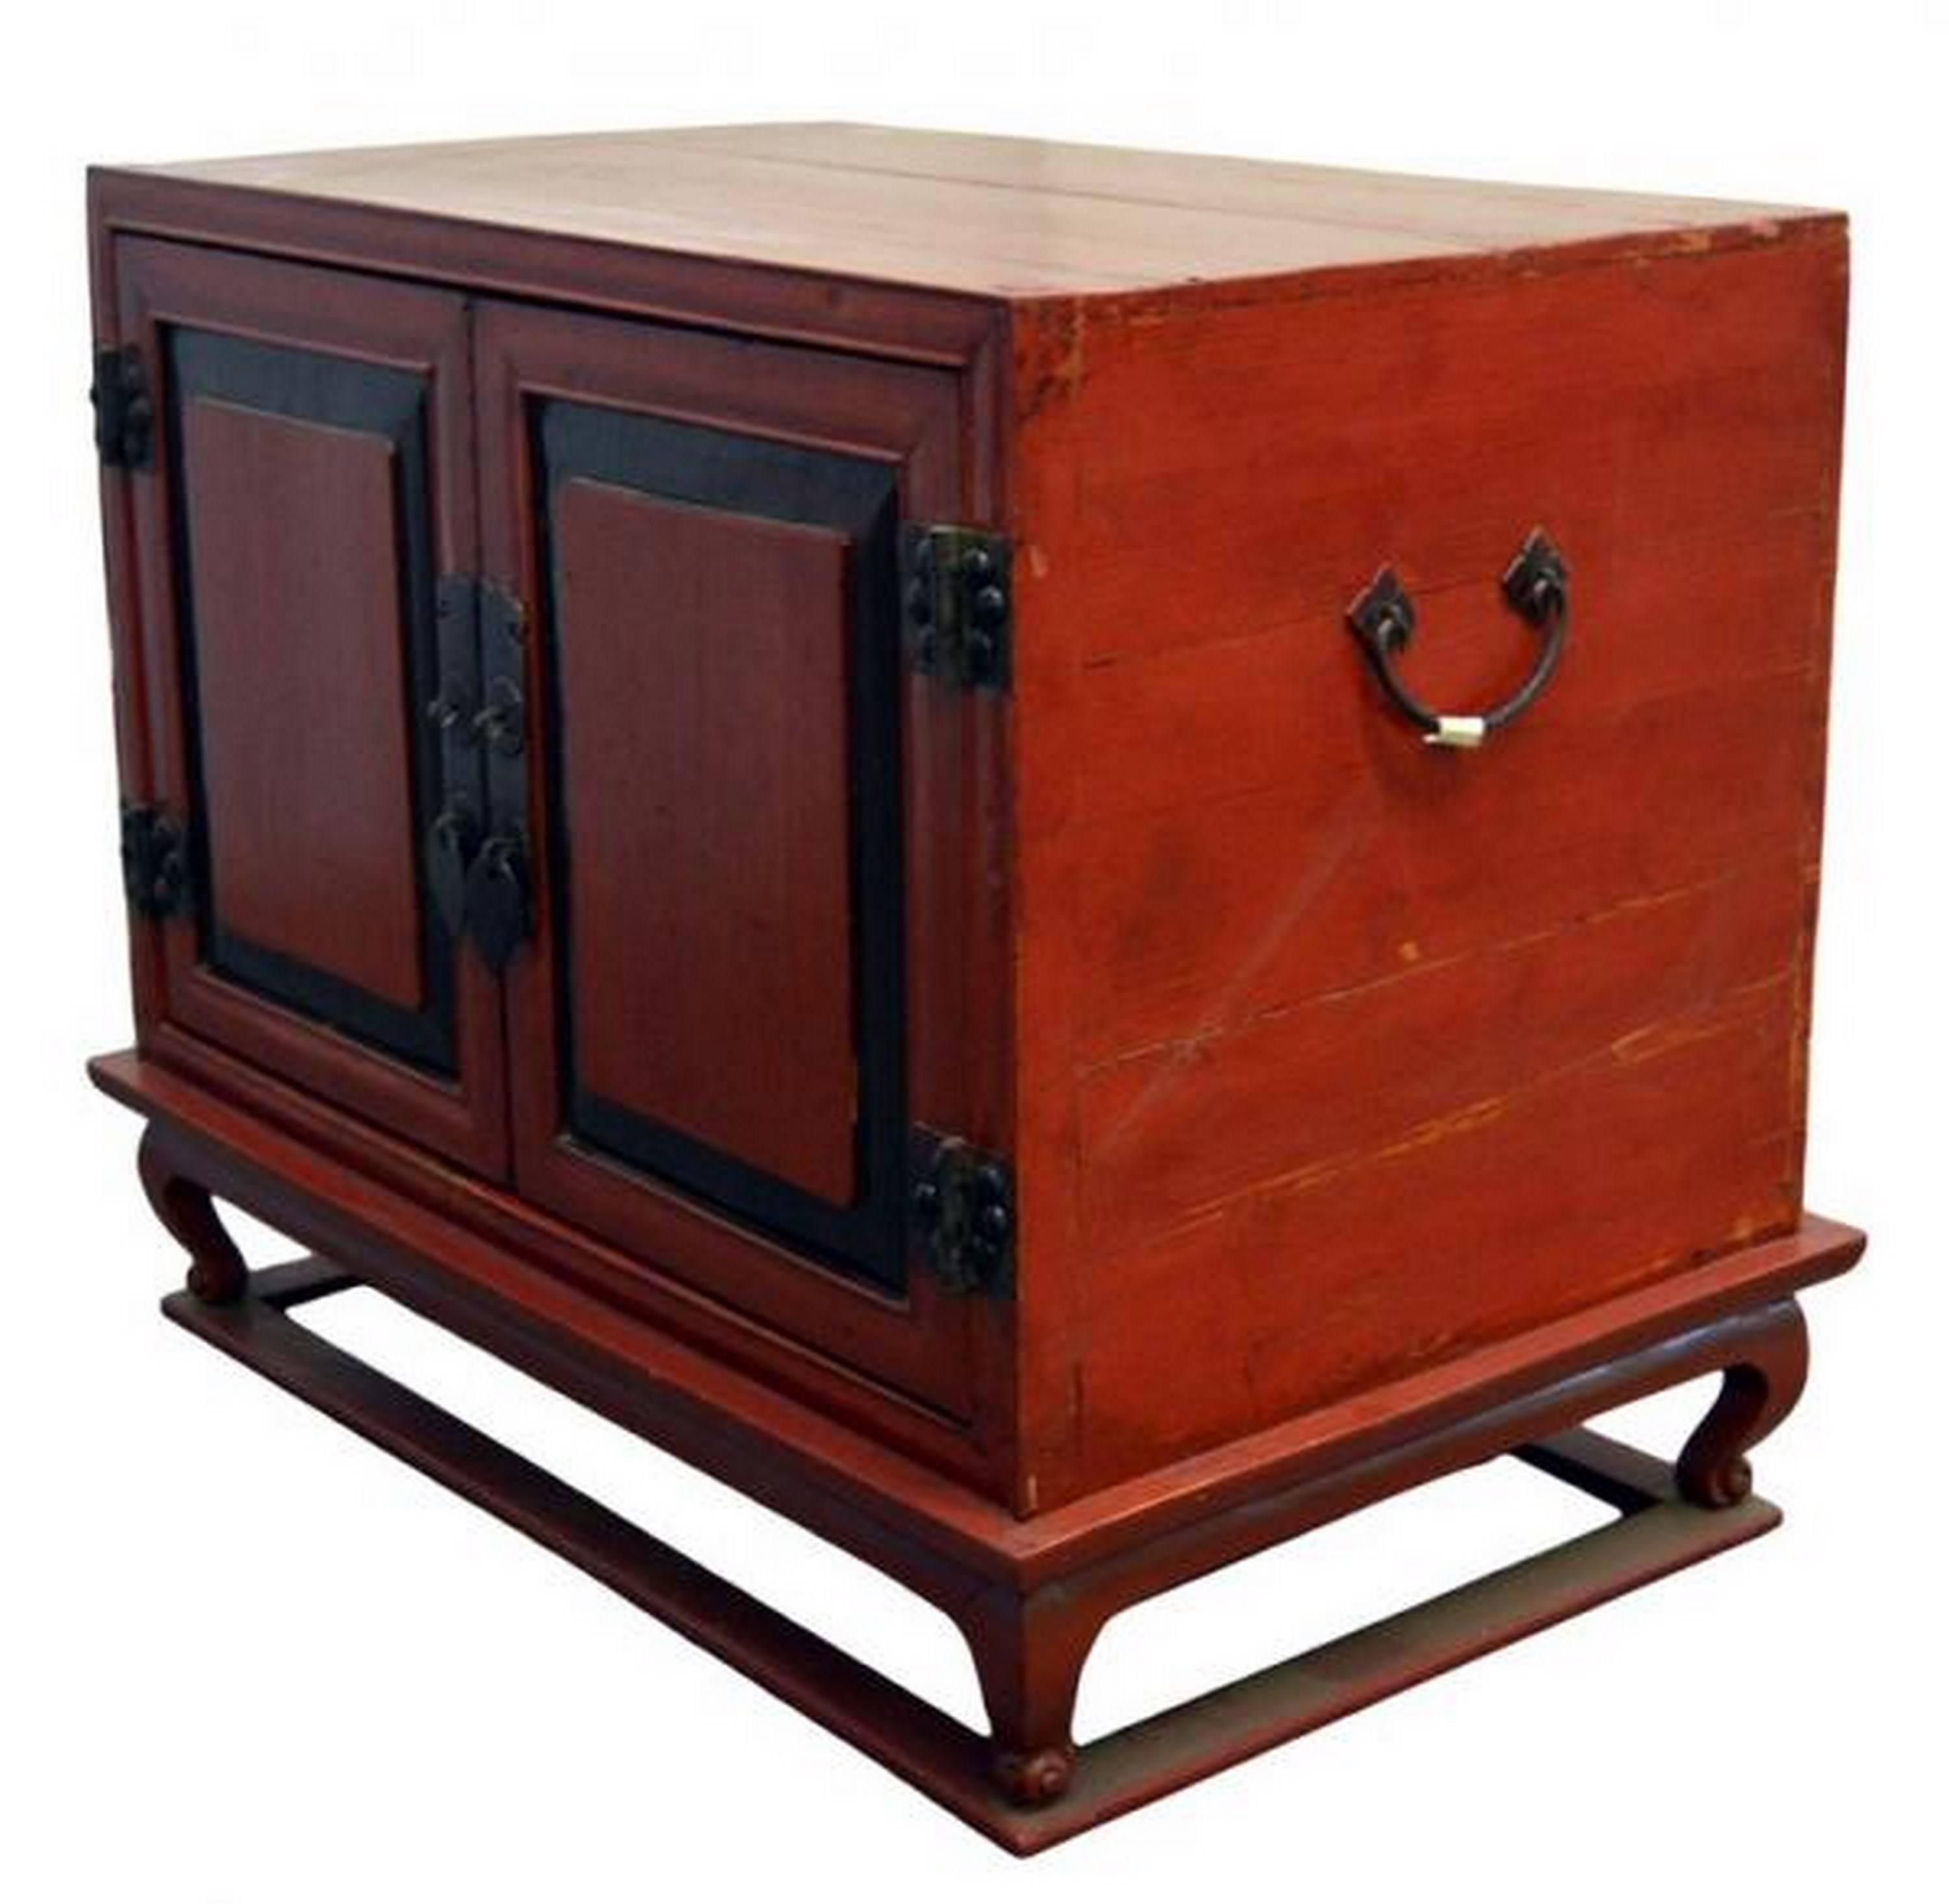 Lacquered Antique Red Lacquer Bedside Cabinet with Hardware from Mid 19th Century China For Sale